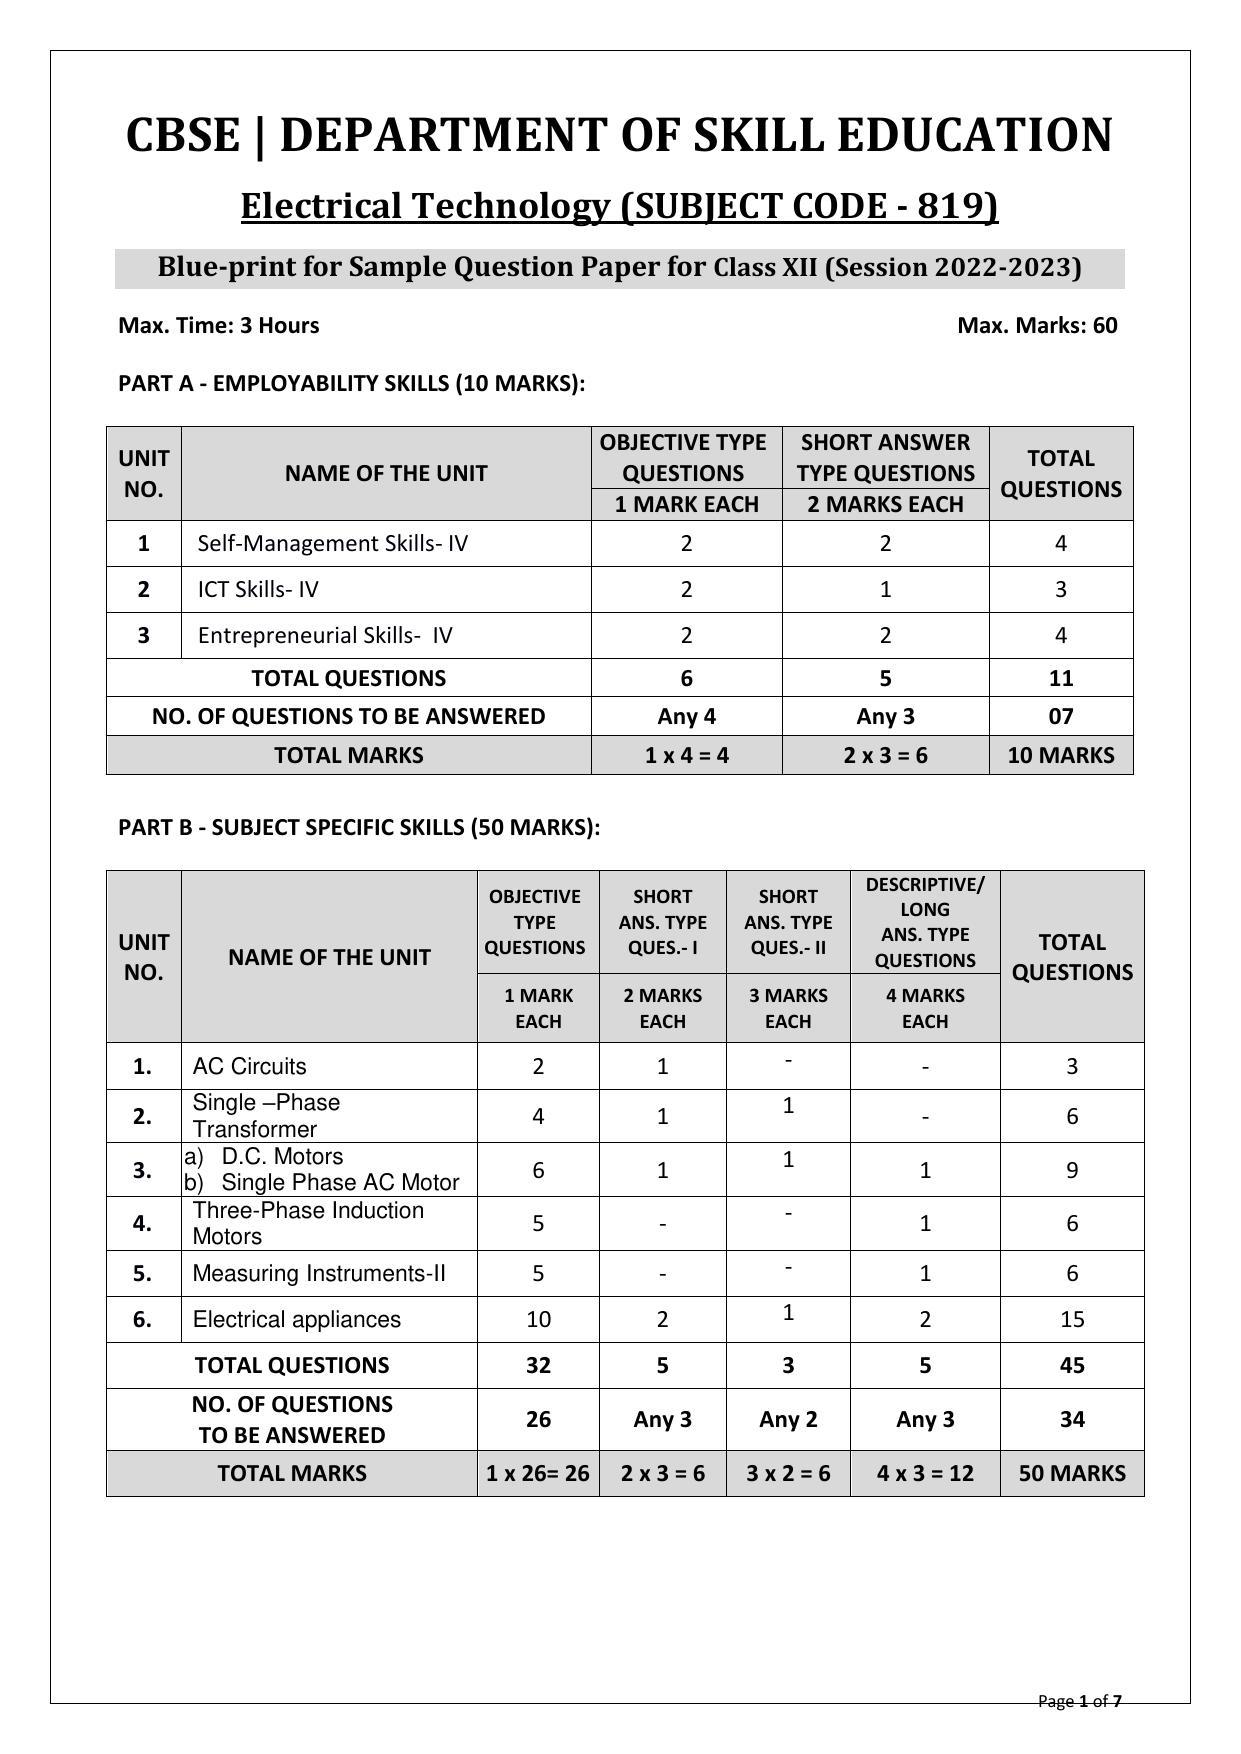 CBSE Class 10 Electrical Technology (Skill Education) Sample Papers 2023 - Page 1